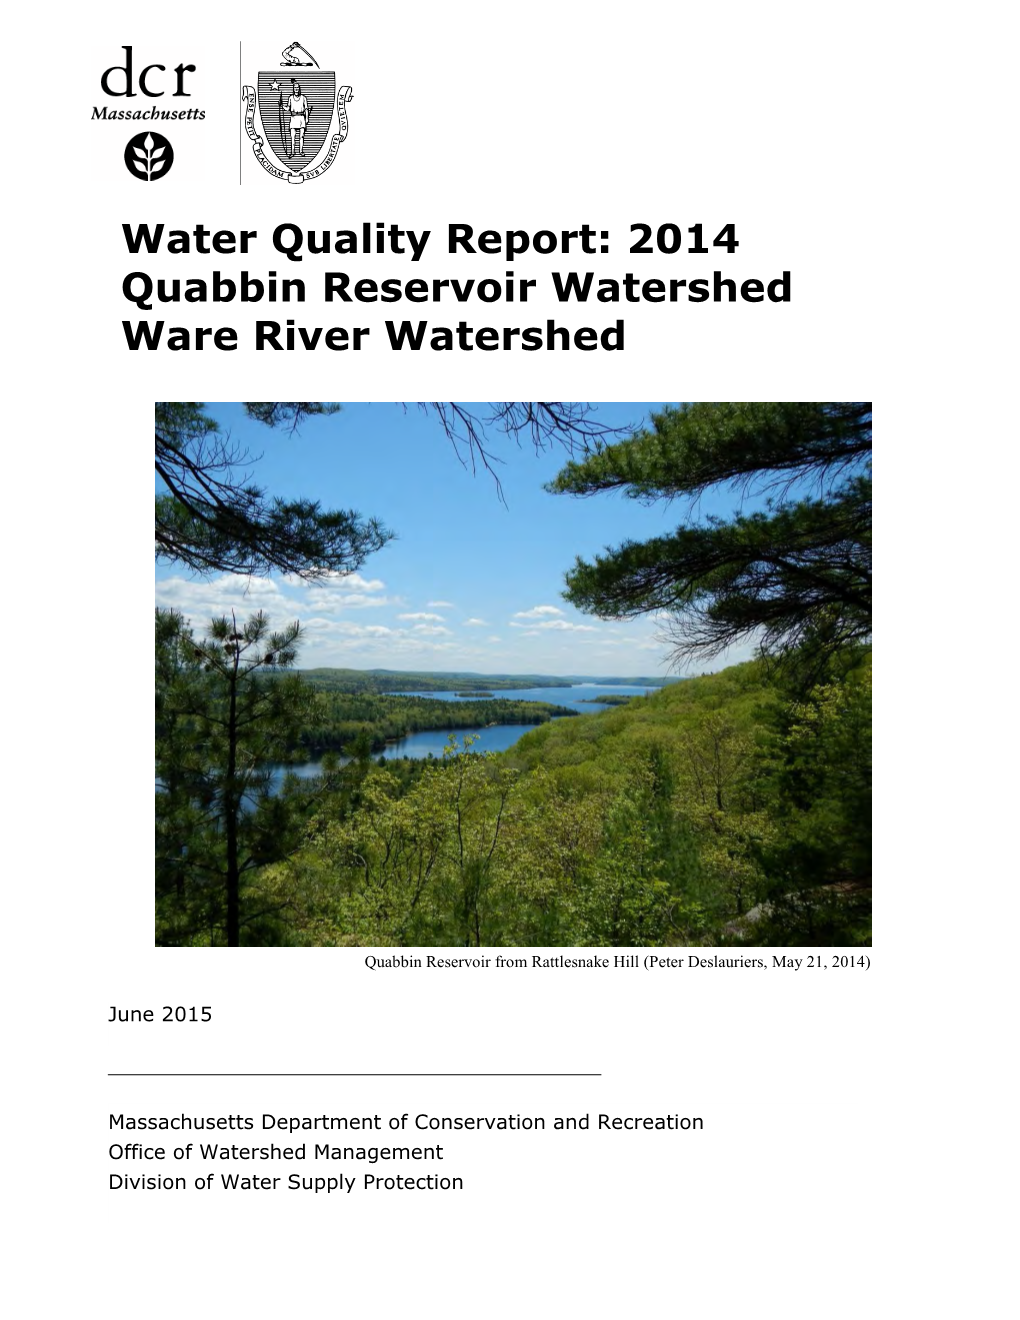 Water Quality Report: 2014 Quabbin Reservoir Watershed Ware River Watershed